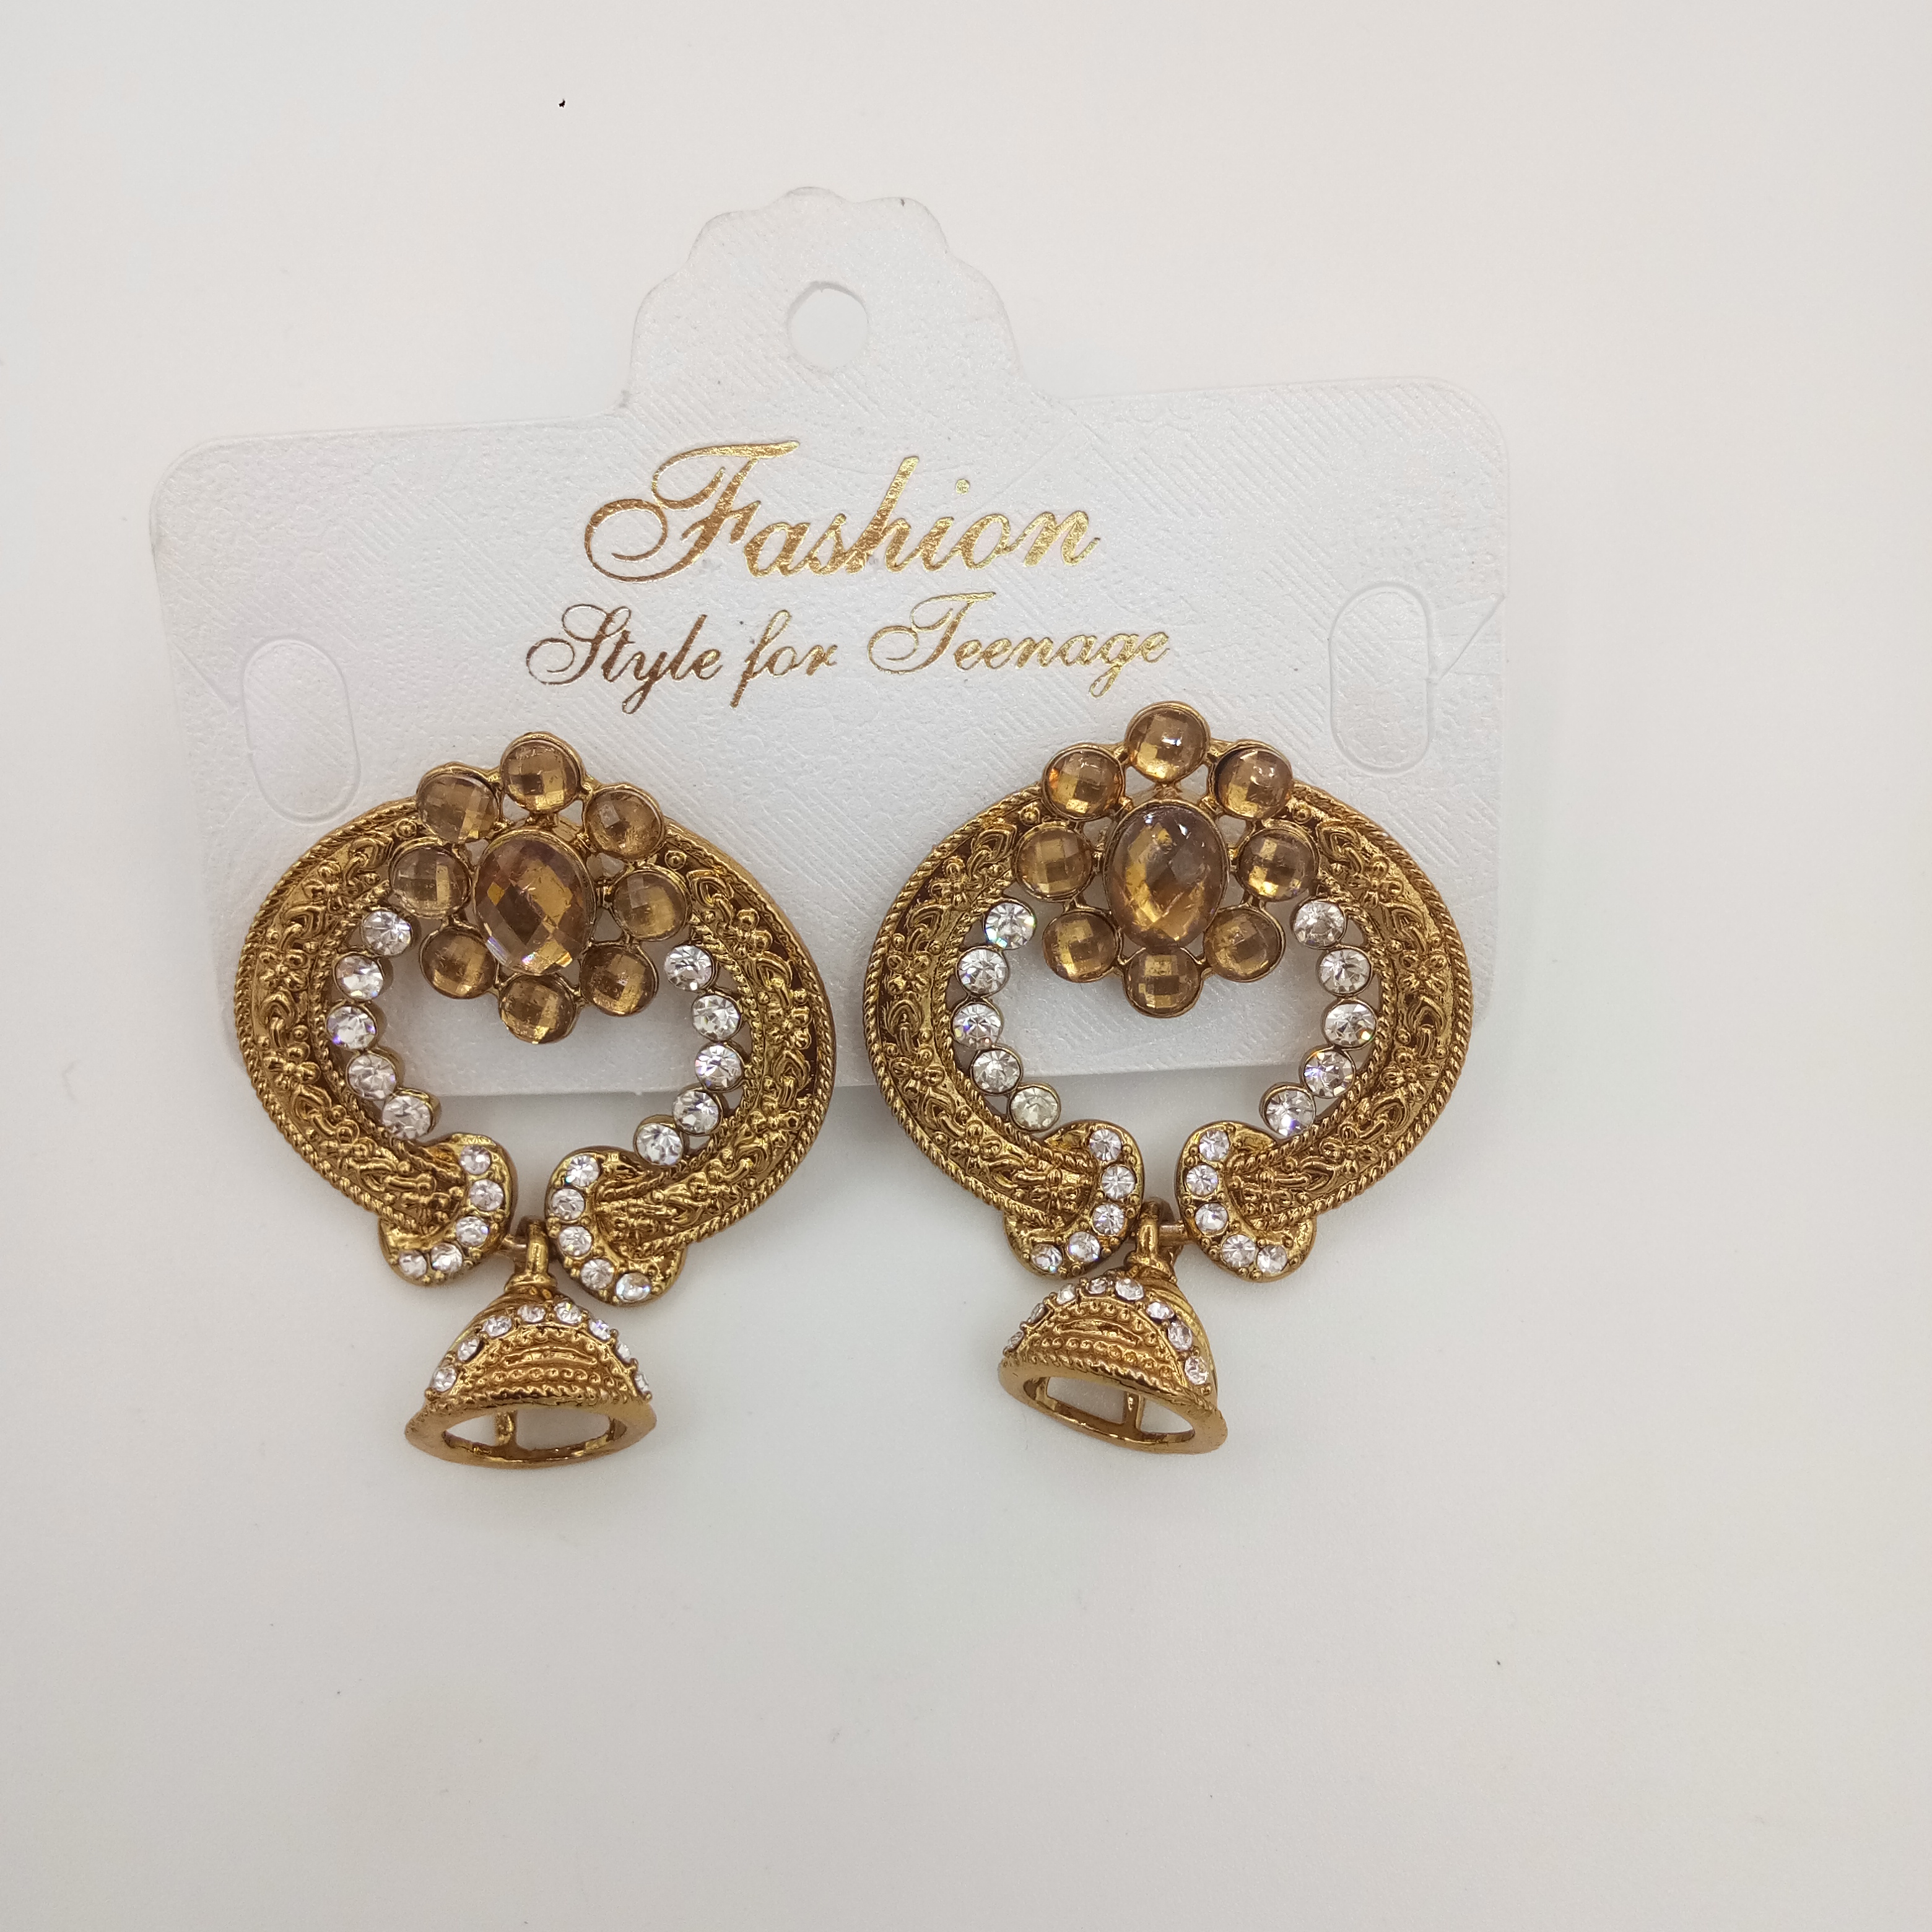 NEW ANTIQUE LCT STN  EARRINGS - 52993